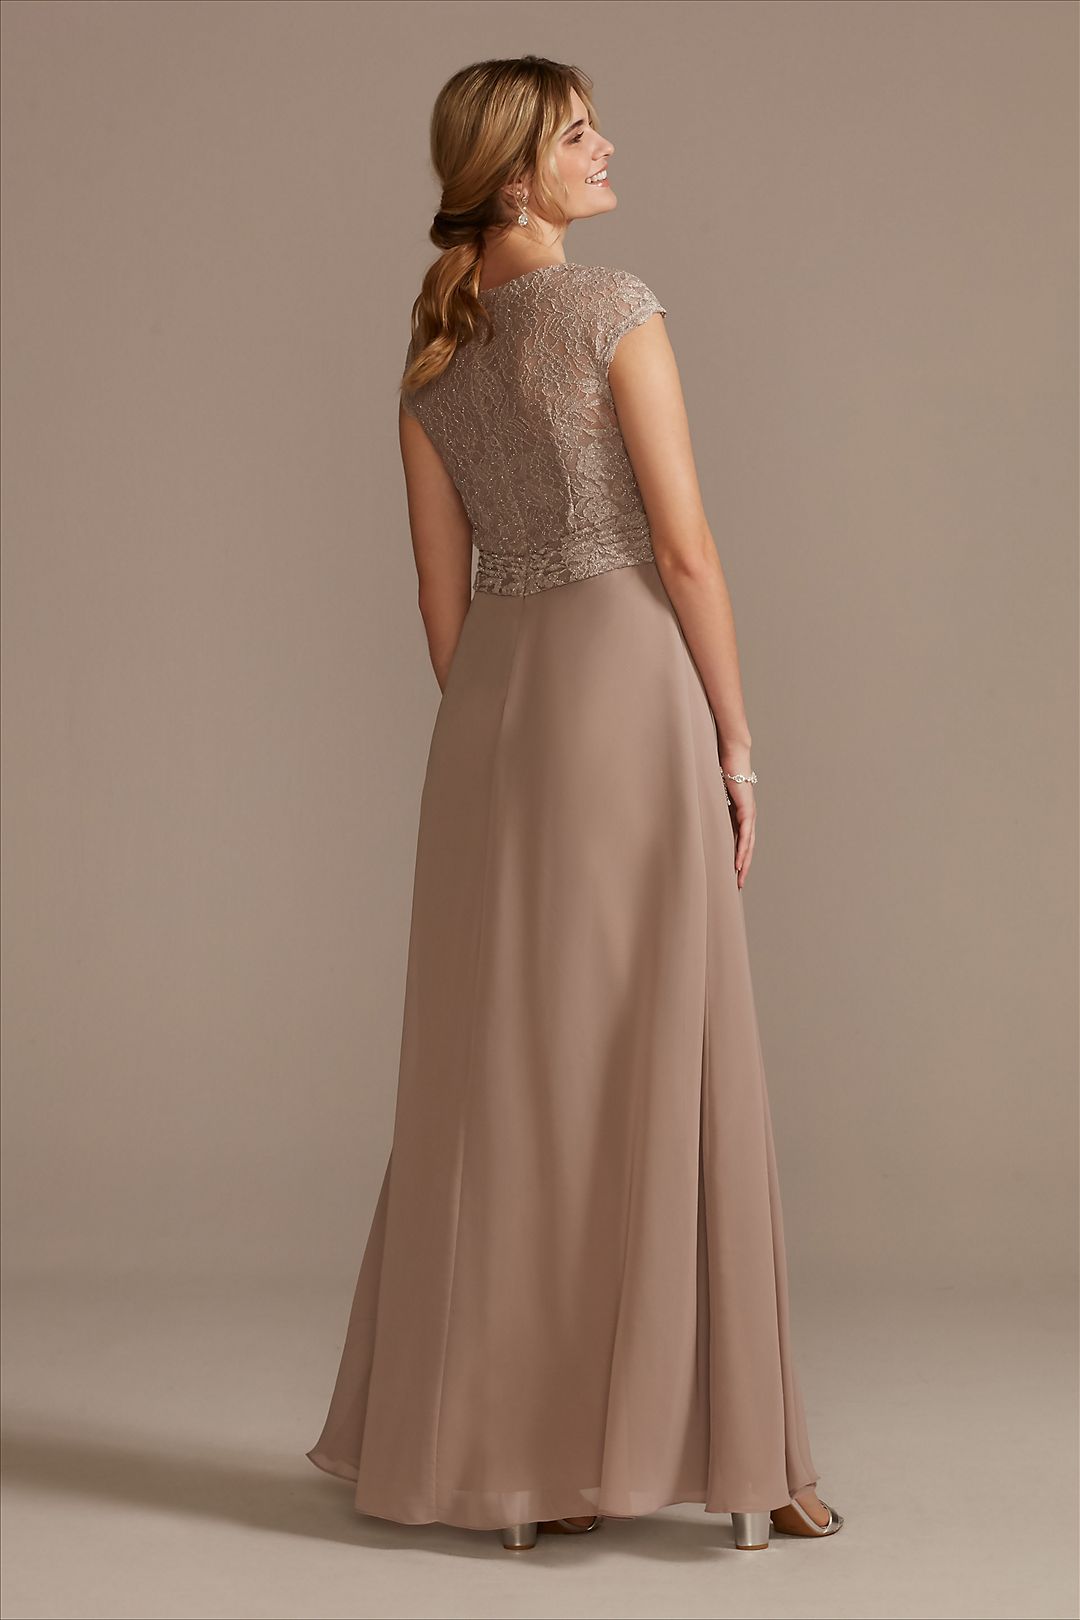 Chiffon A-Line Dress with Lace Cap Sleeve Overlay Image 2